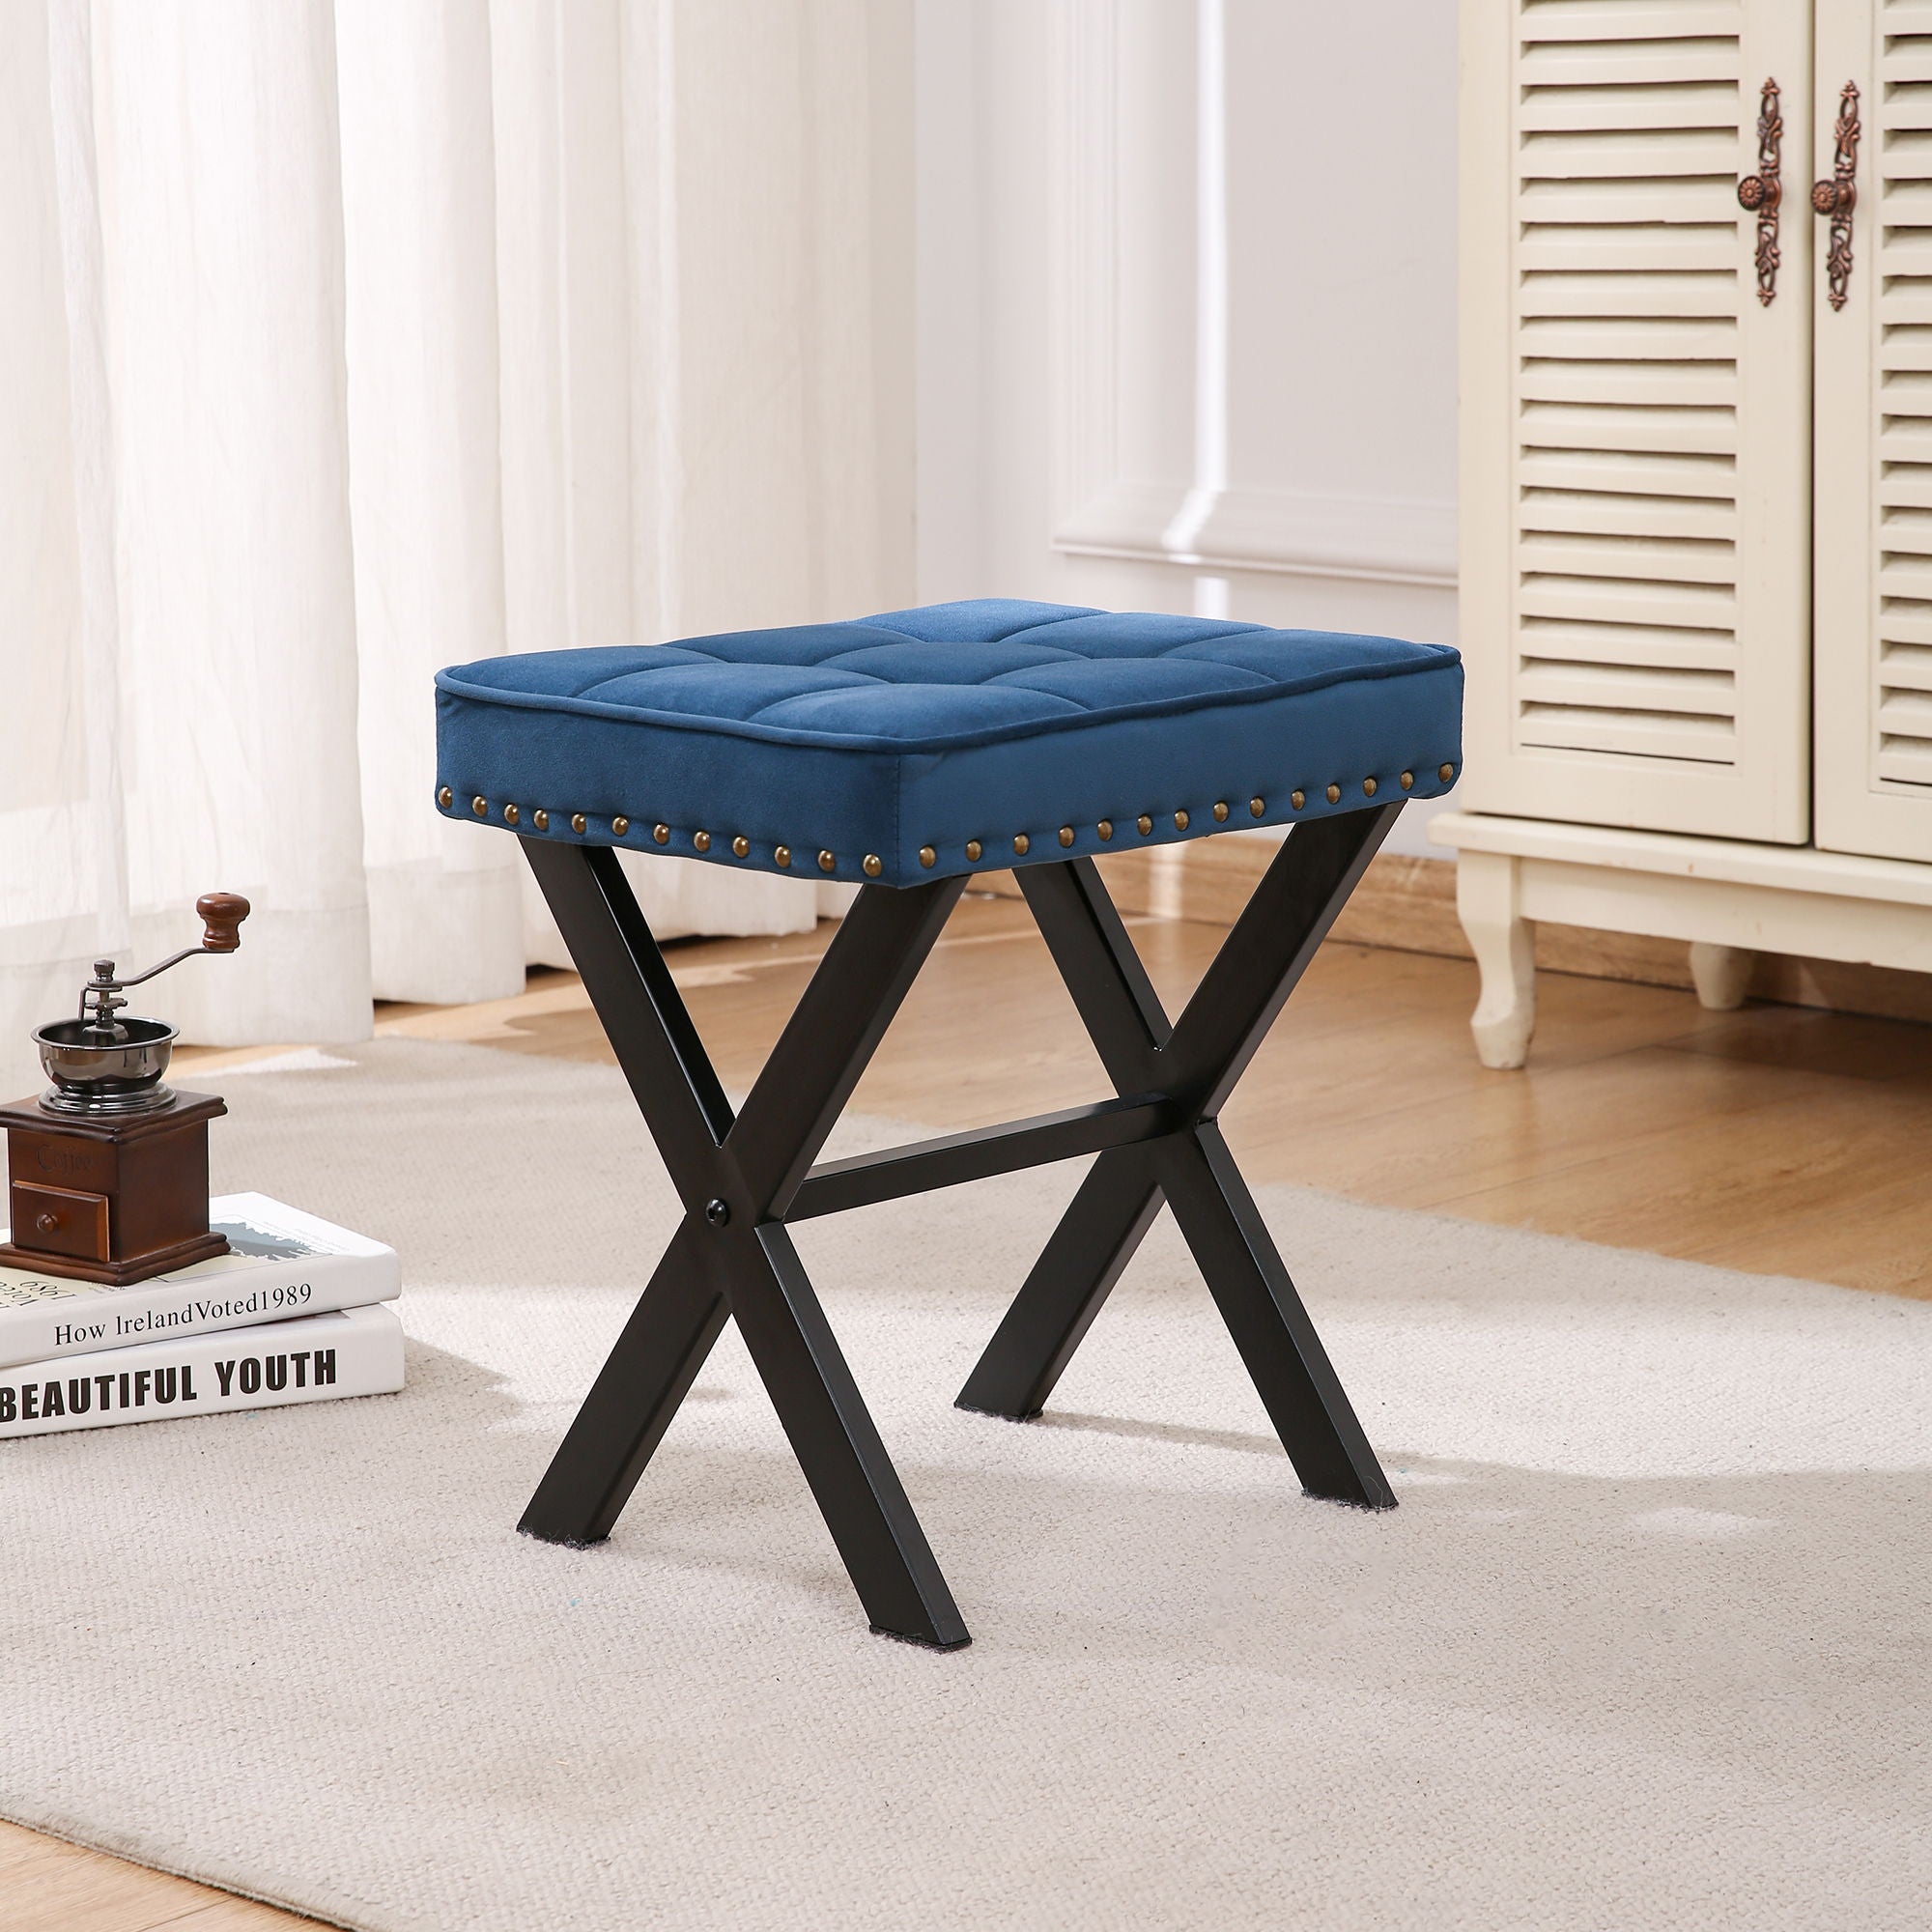 Fabric Upholstered Bench Ottoman Footstool Seat With X - Shaped Metal Legs (Blue)